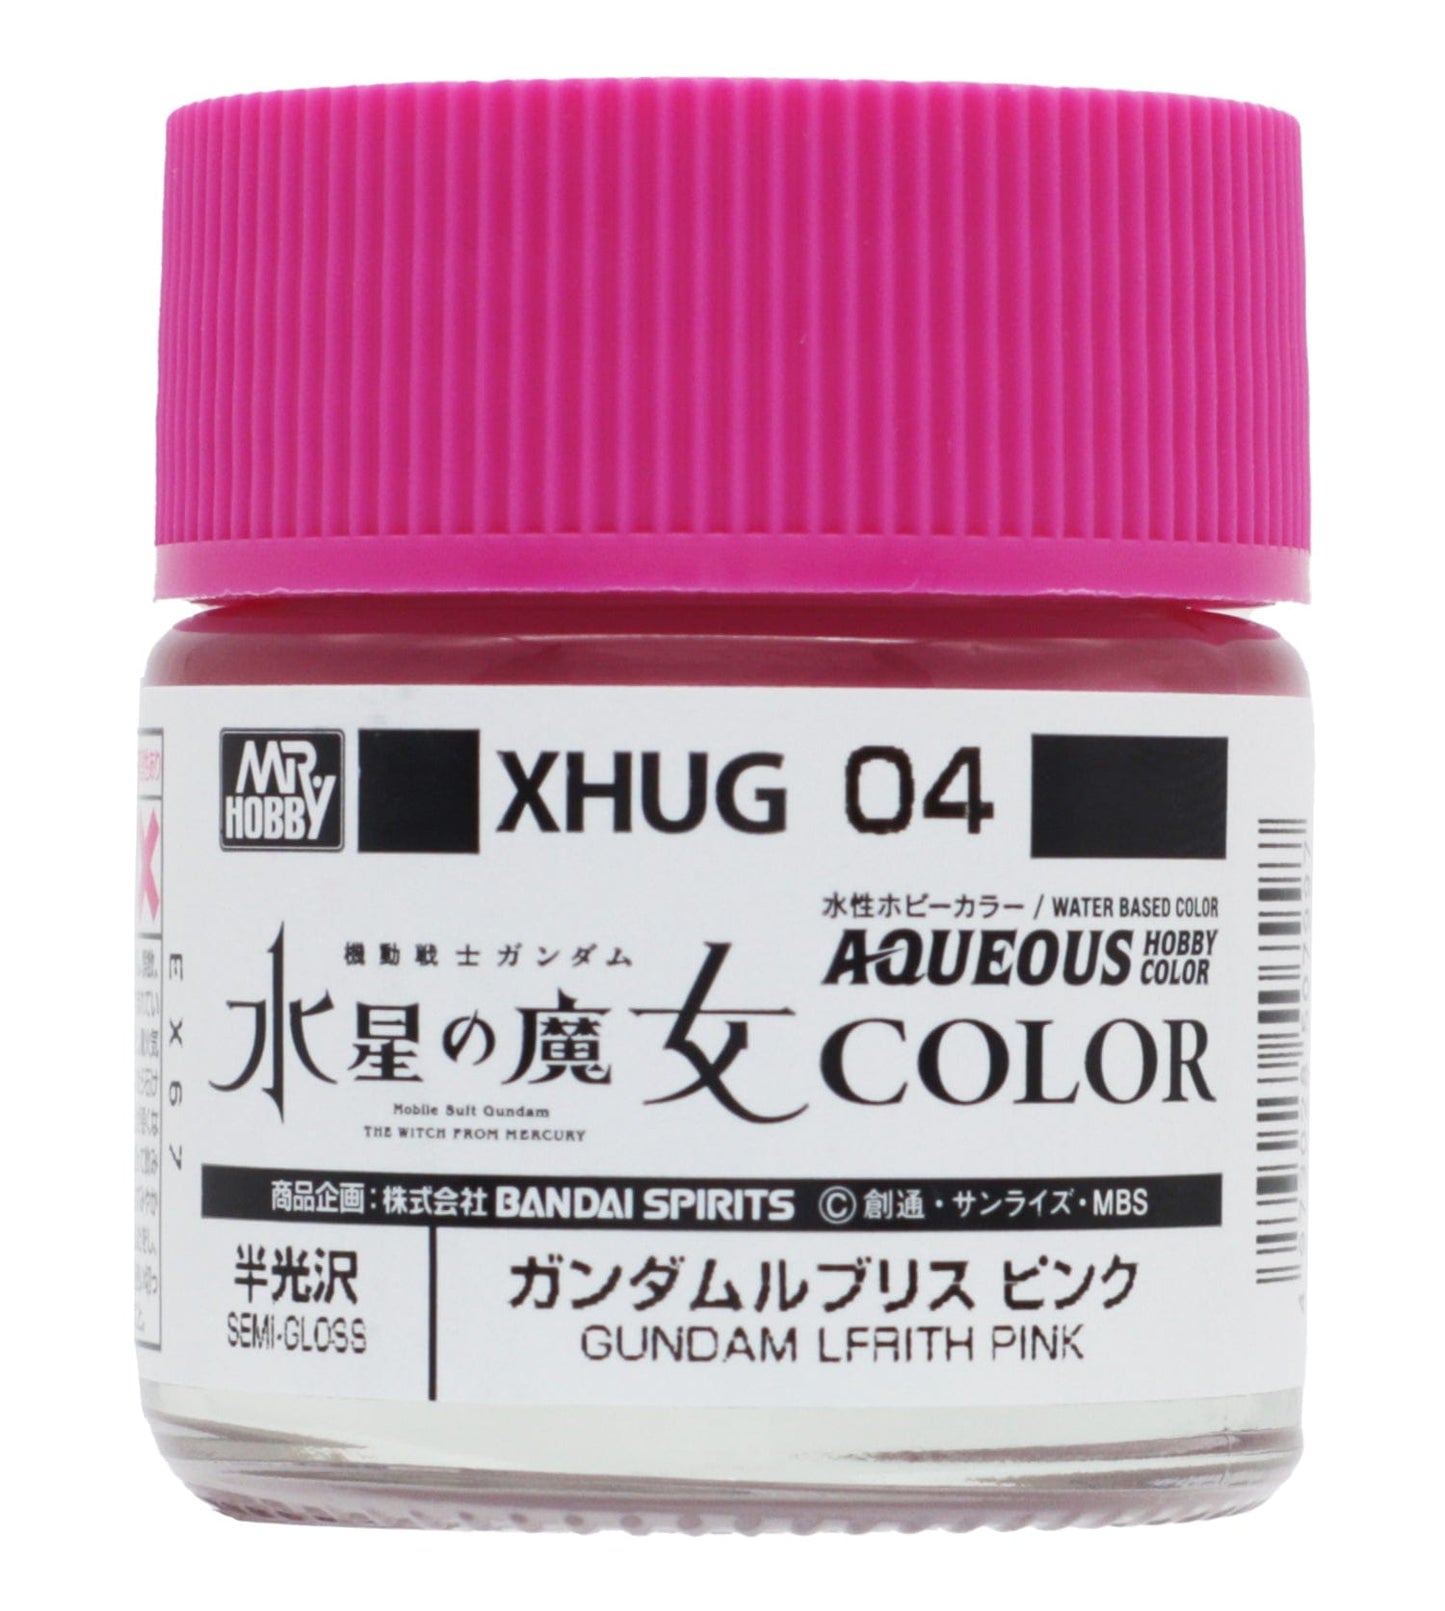 Mr. Hobby/Mr. Color Paint XHUG04 Lfrith Pink Witch From Mercury Aqueous Paint